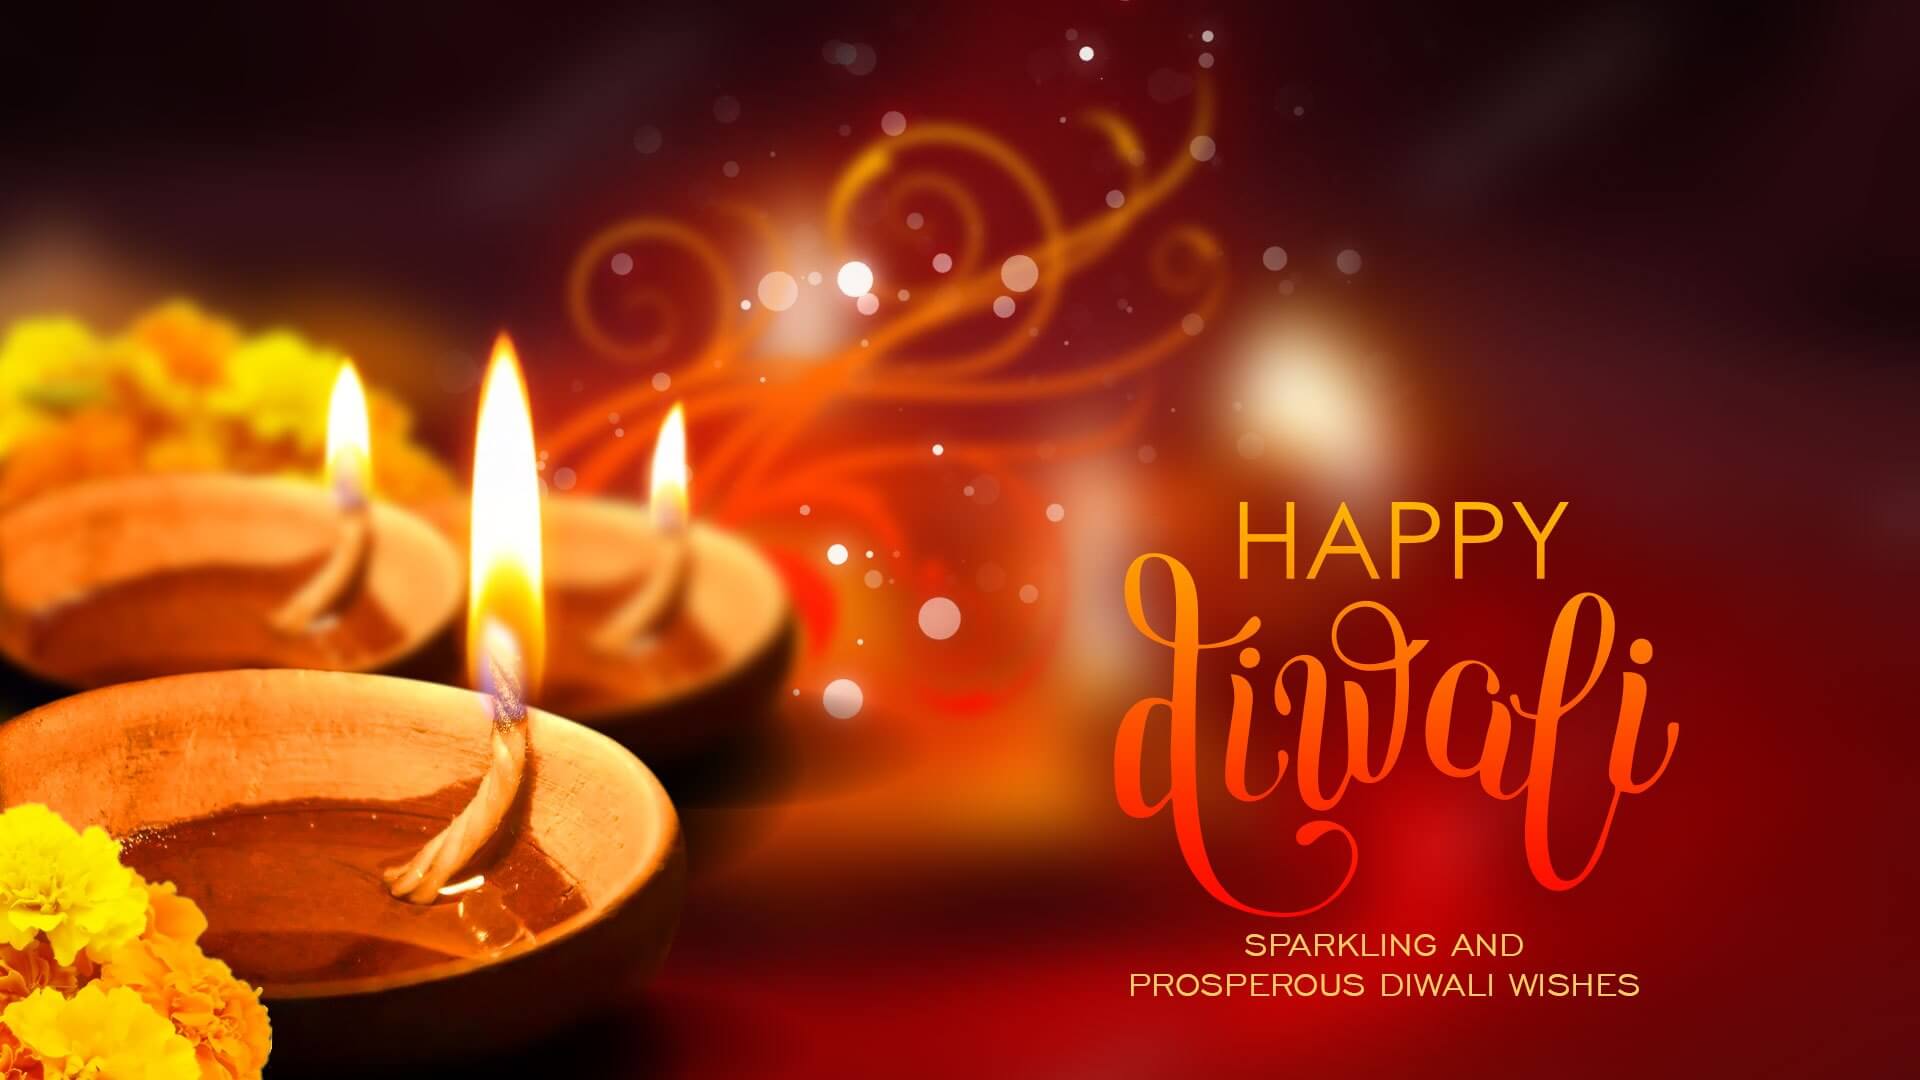 Happy Diwali Status for friends in English